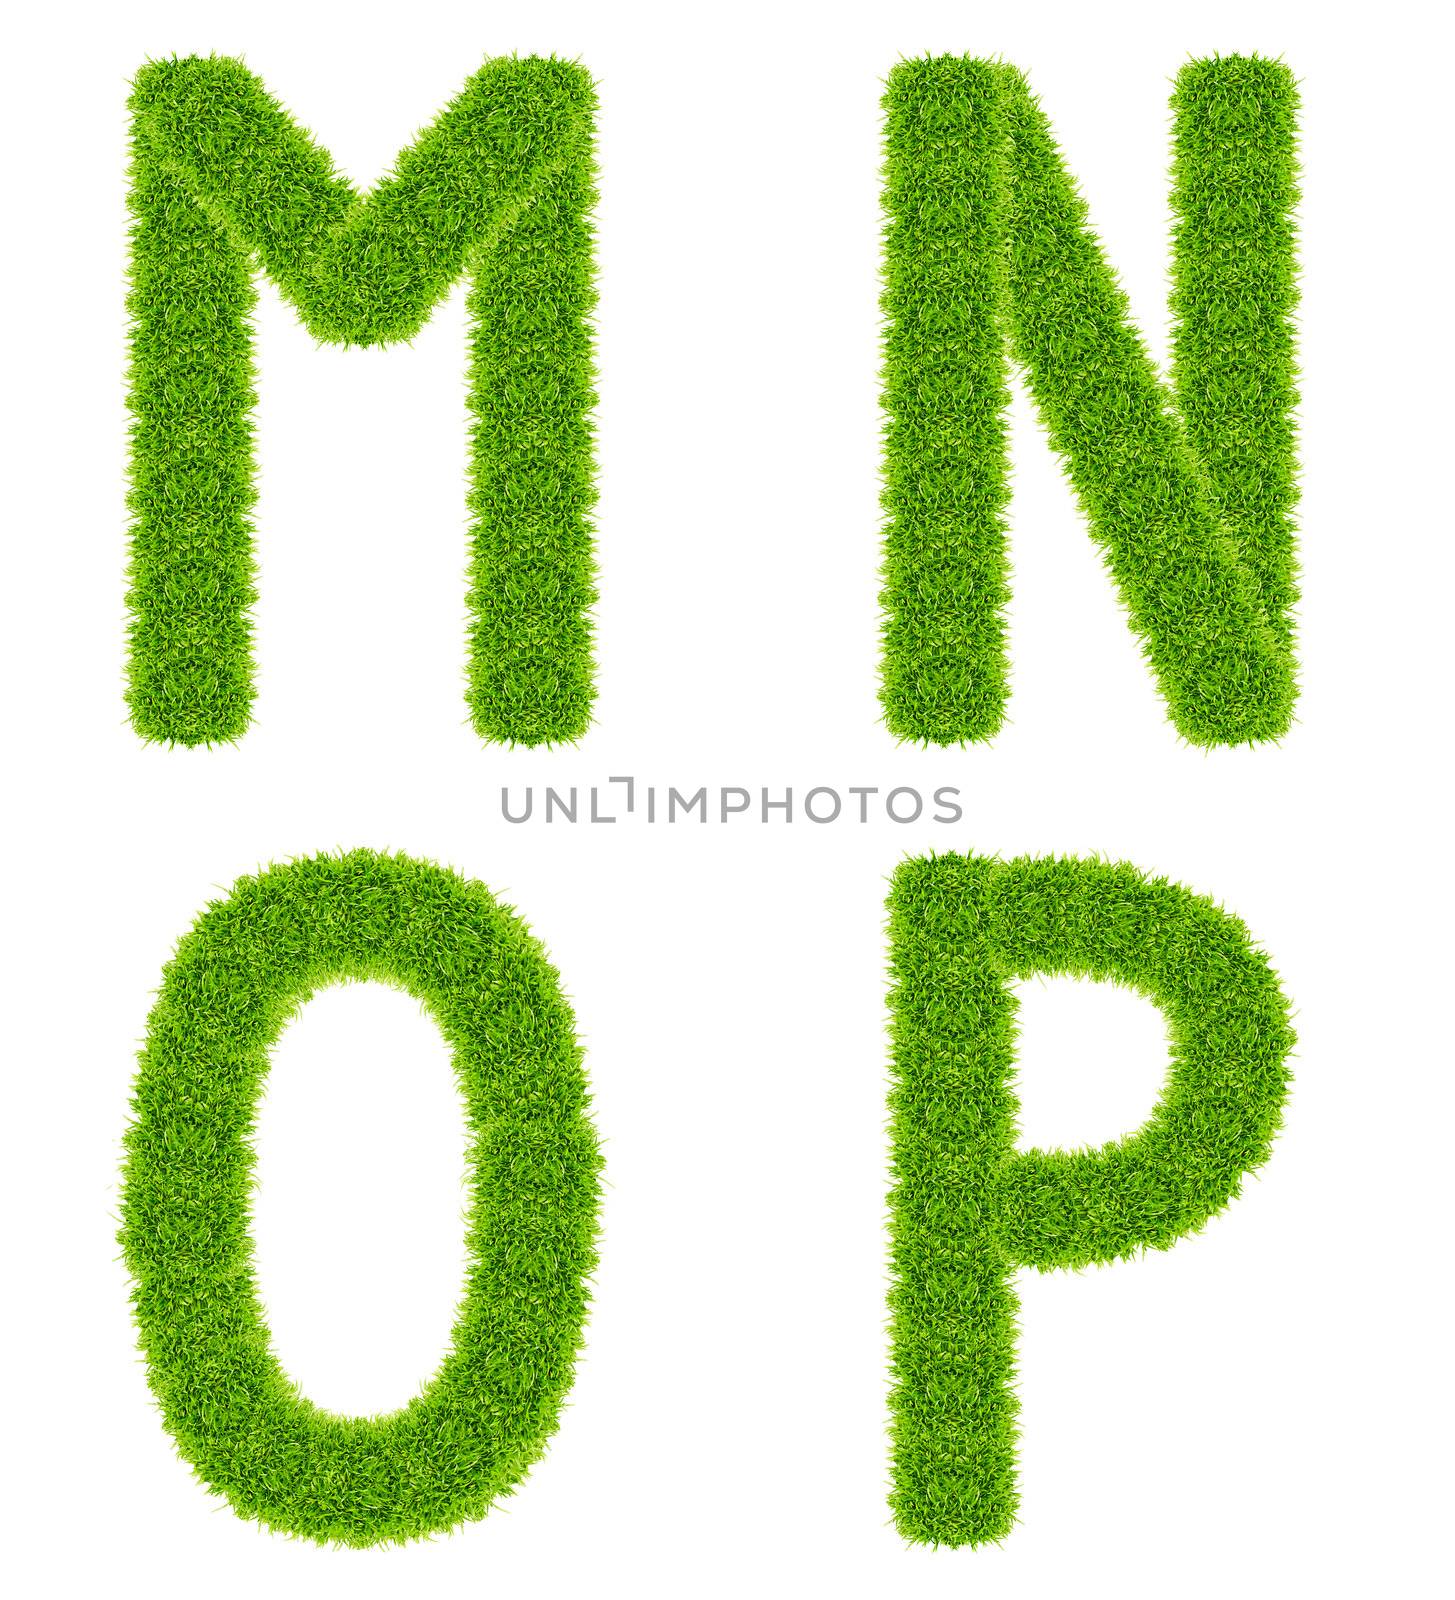 green grass letter mnop isolated